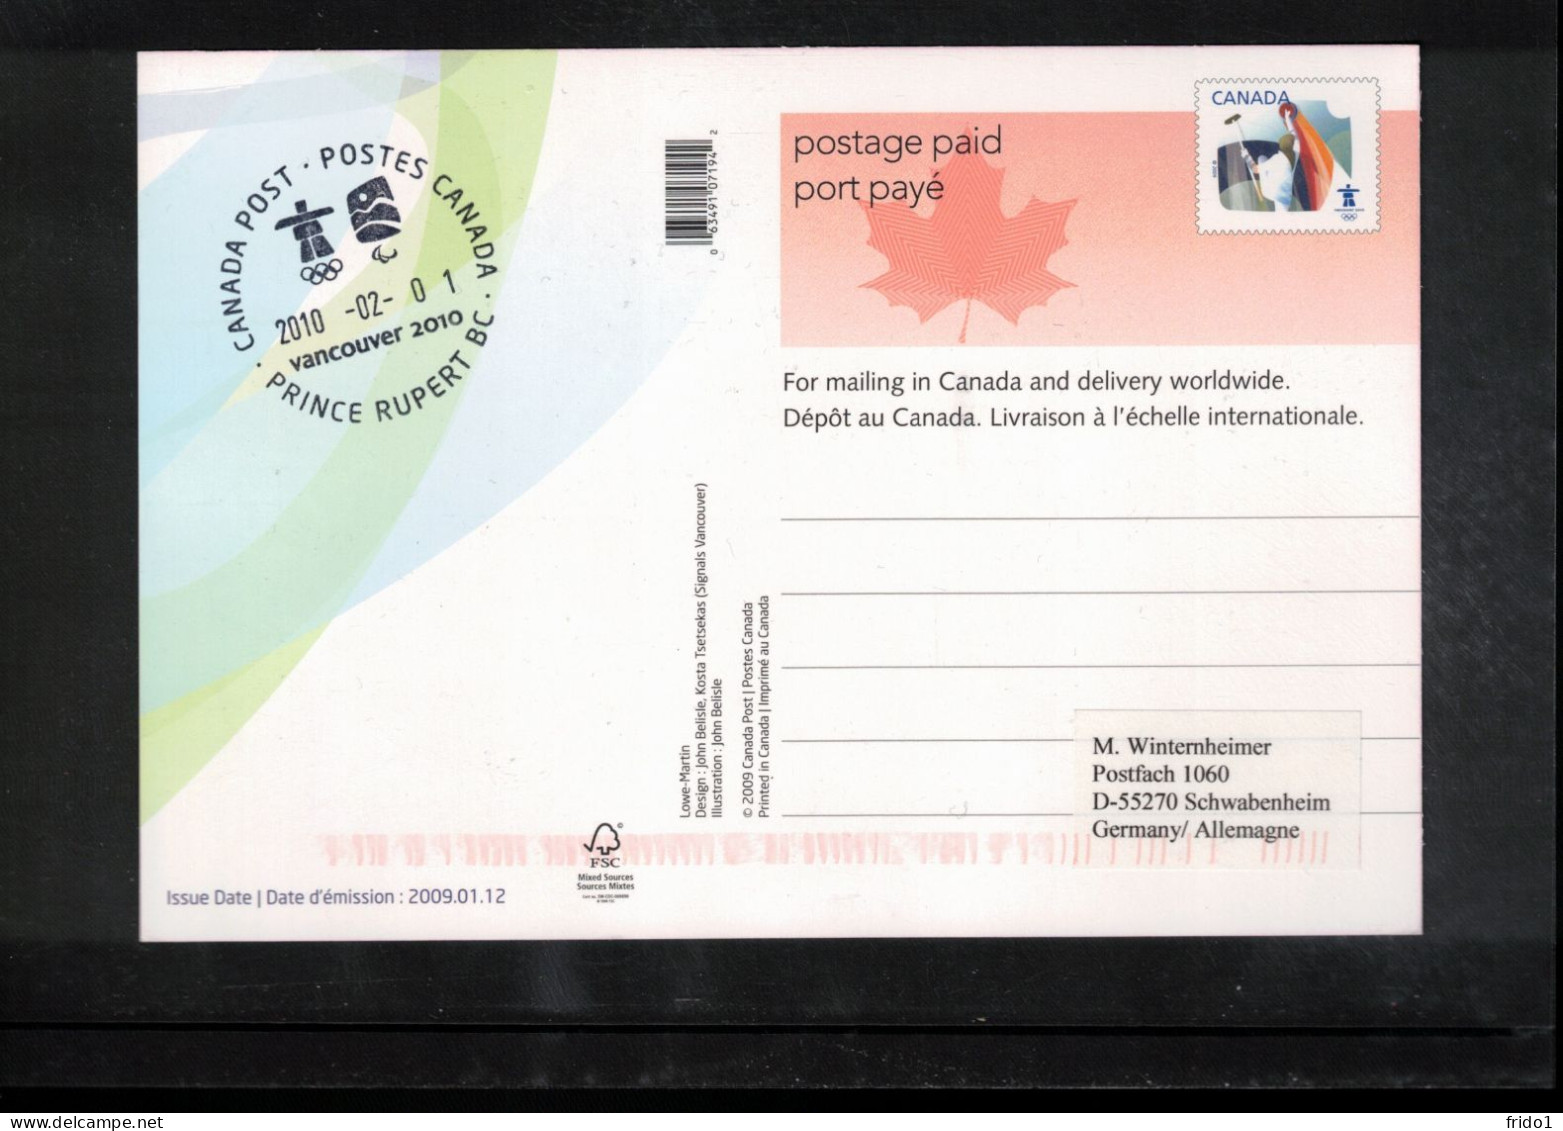 Canada 2010 Olympic Games Vancouver - PRINCE RUPERT BC Postmark Interesting Postcard - Hiver 2010: Vancouver